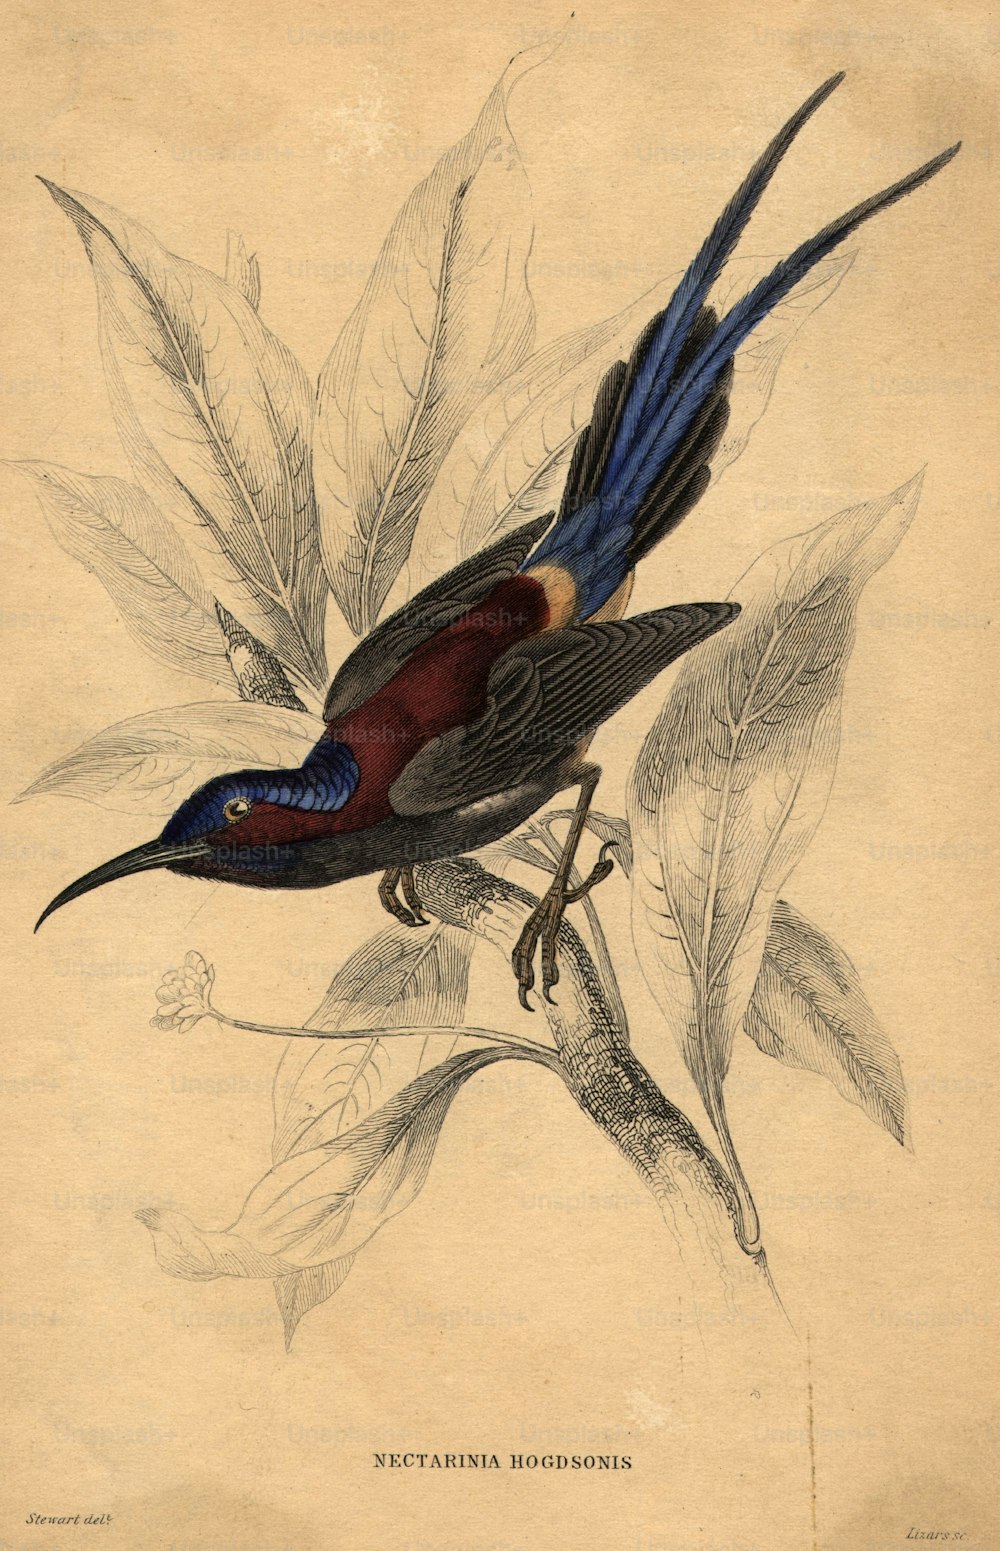 circa 1880:  Nectarinia hogdsonis, a type of humming bird.  (Photo by Hulton Archive/Getty Images)